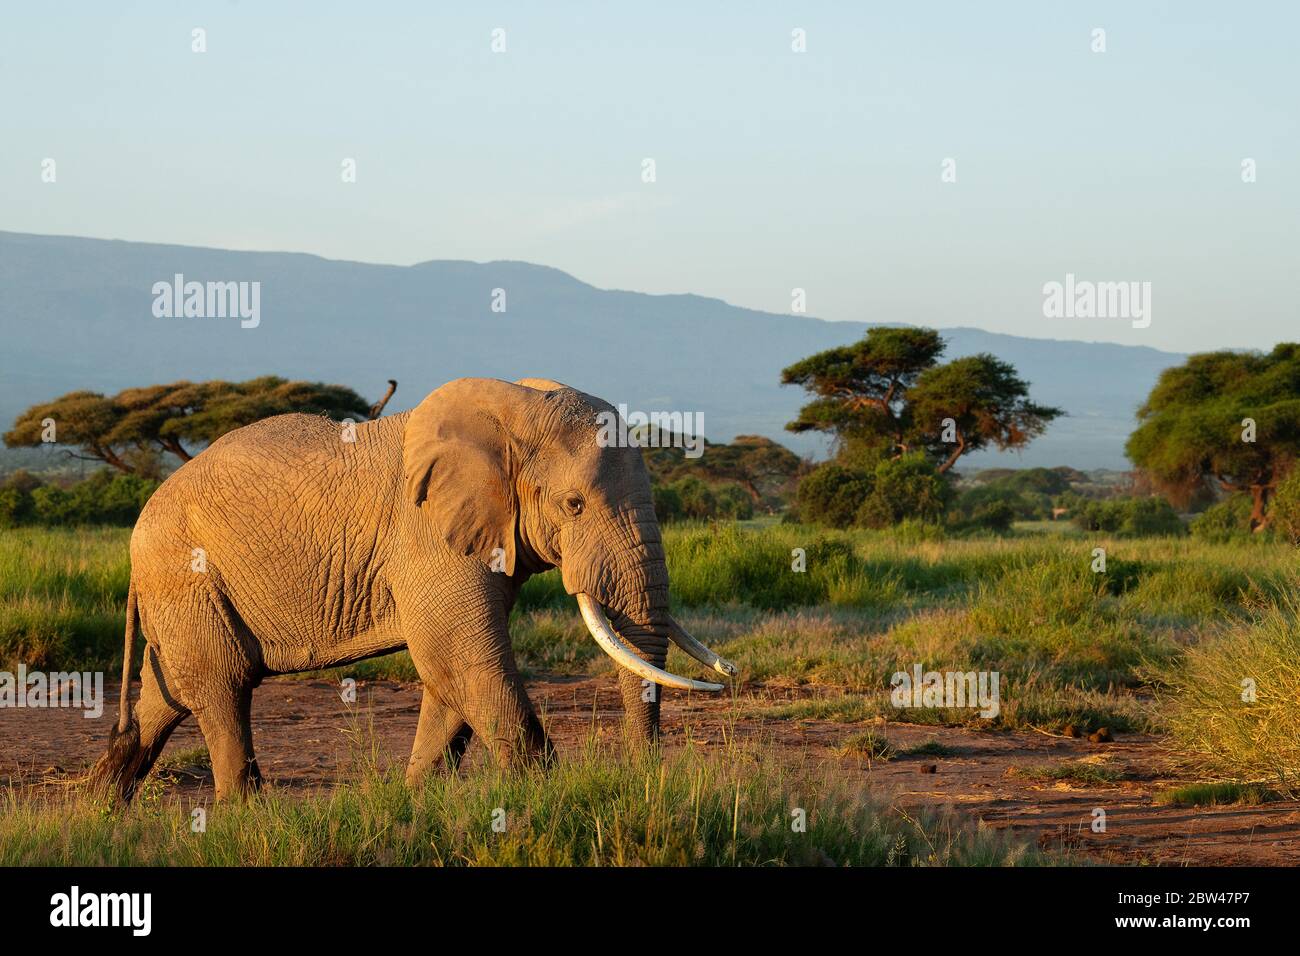 African Bull Elephant in Morning sunlight. Africa is home to many of the world's most famous fauna in human culture such as lions‚ rhinos‚ cheetahs. Stock Photo